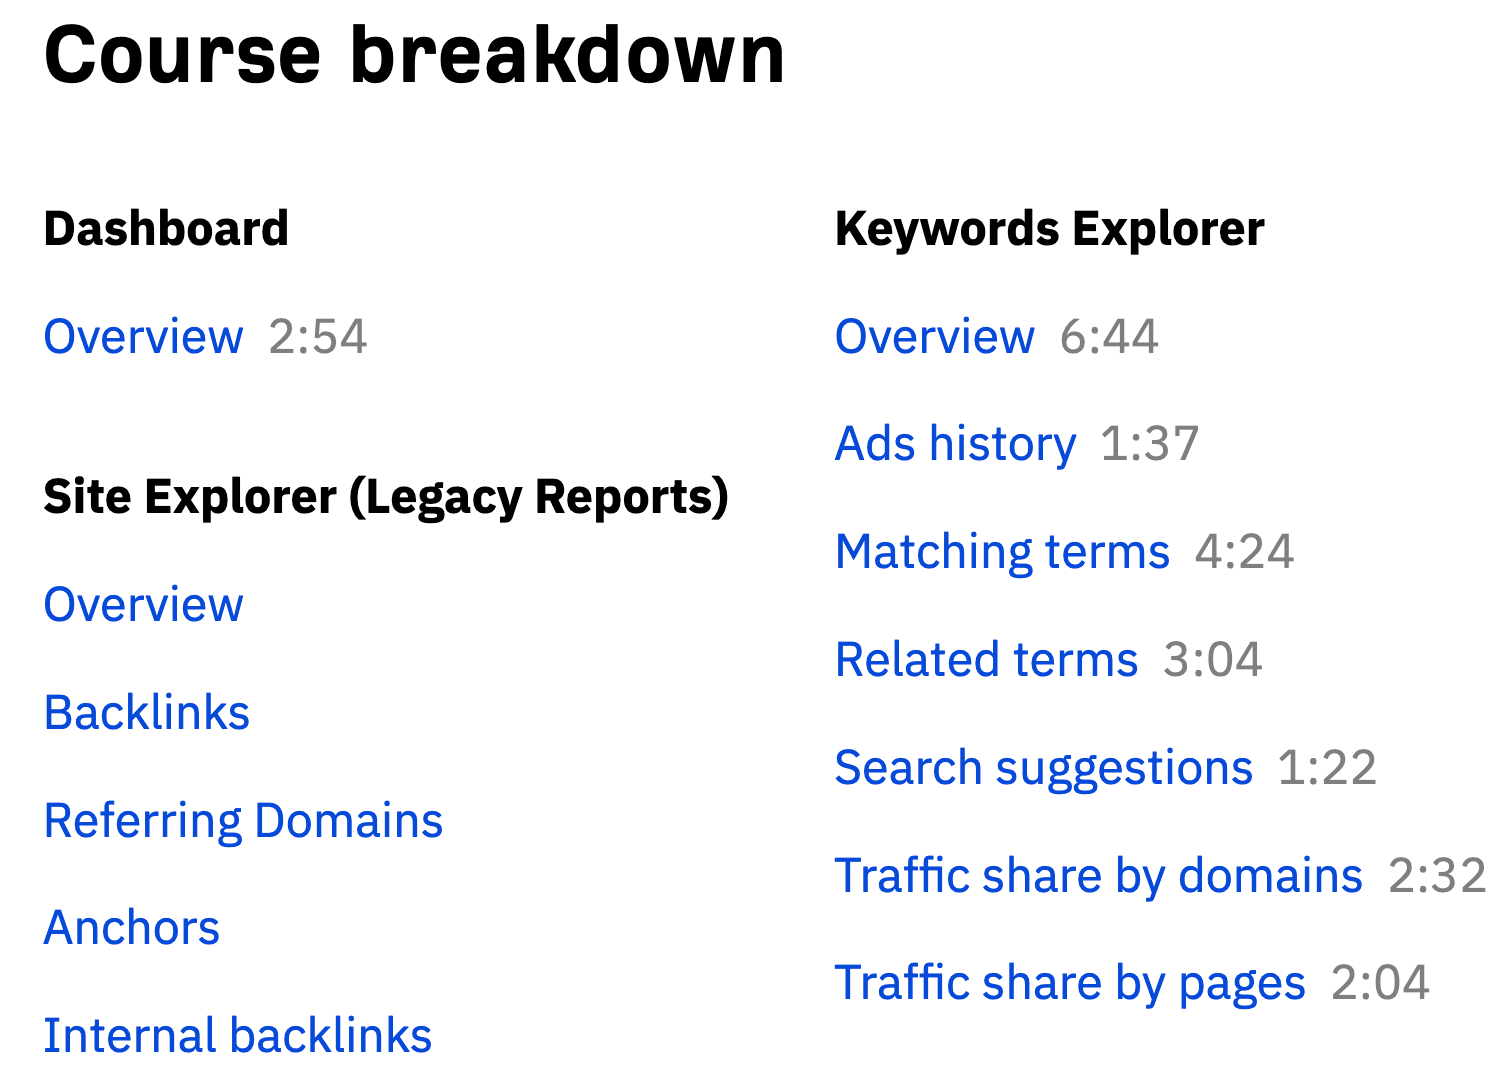 The course breakdown for "How to use Ahrefs"
